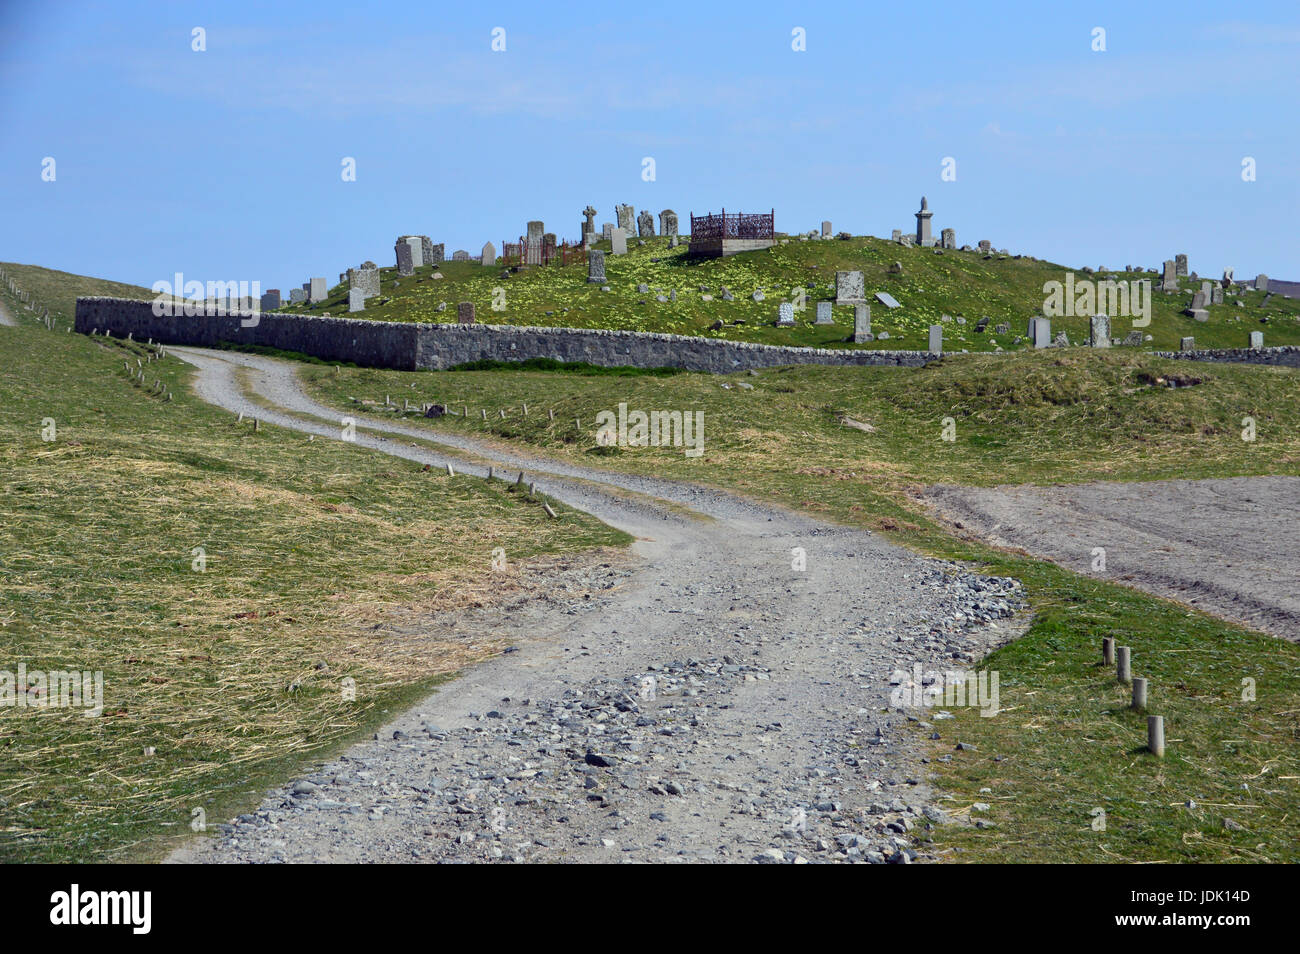 The Old Burial Ground & Cemetery at Clachan Sands (Clachan Shannda) Isle of North Uist, Outer Hebrides,Scottish Islands, Scotland,UK. Stock Photo